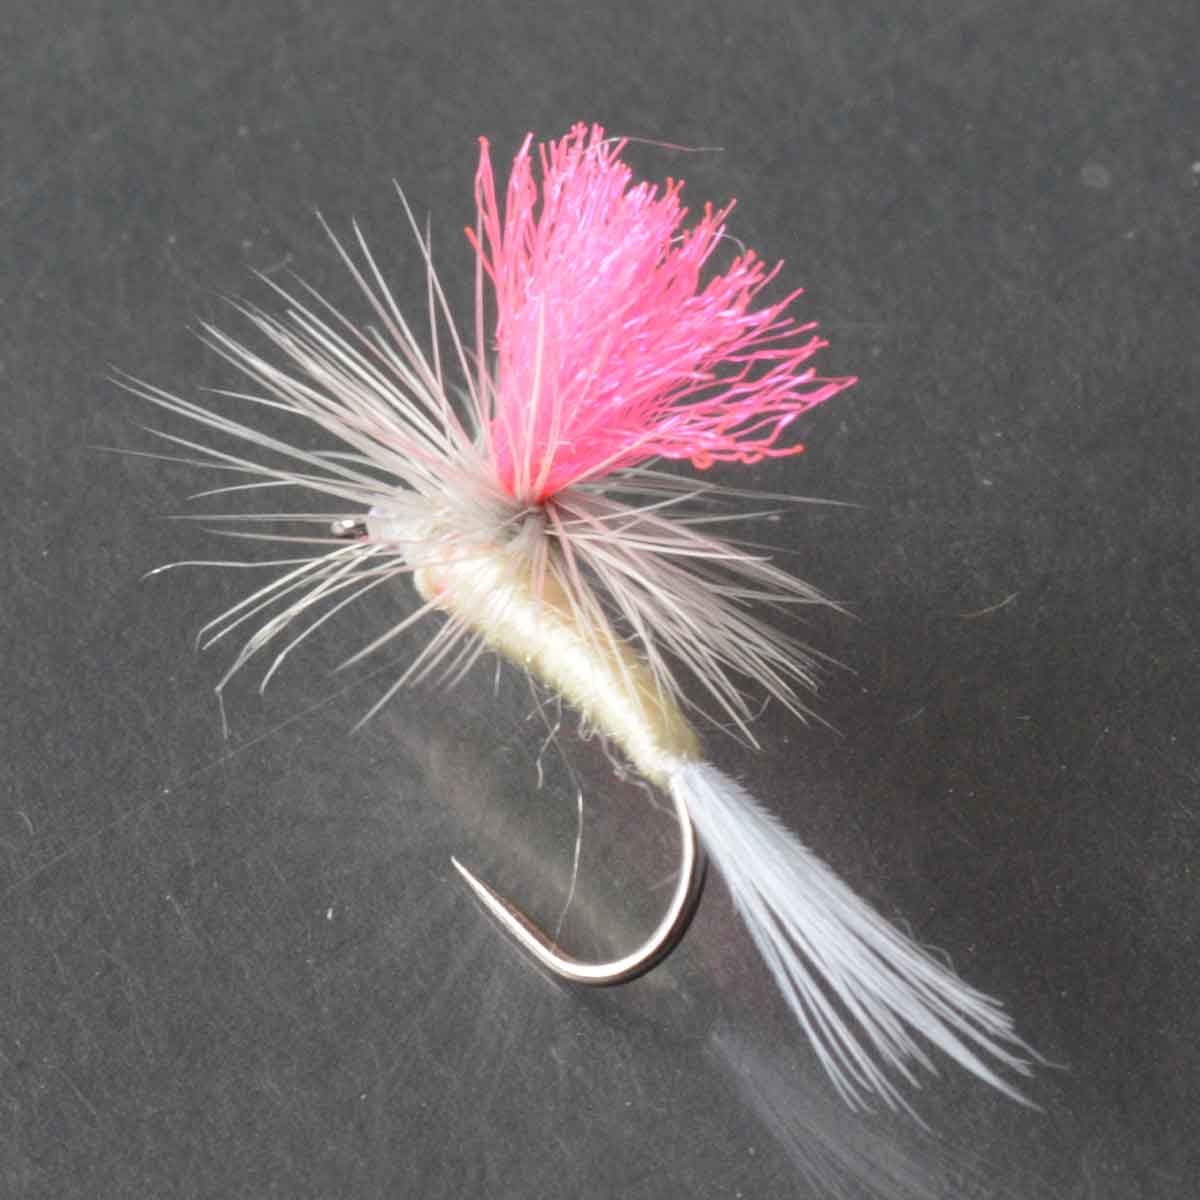  dry fly pala Shute PMD Hi Vis (#12 #14 #16 #18) fly final product fly lure fishing river .. control Area 